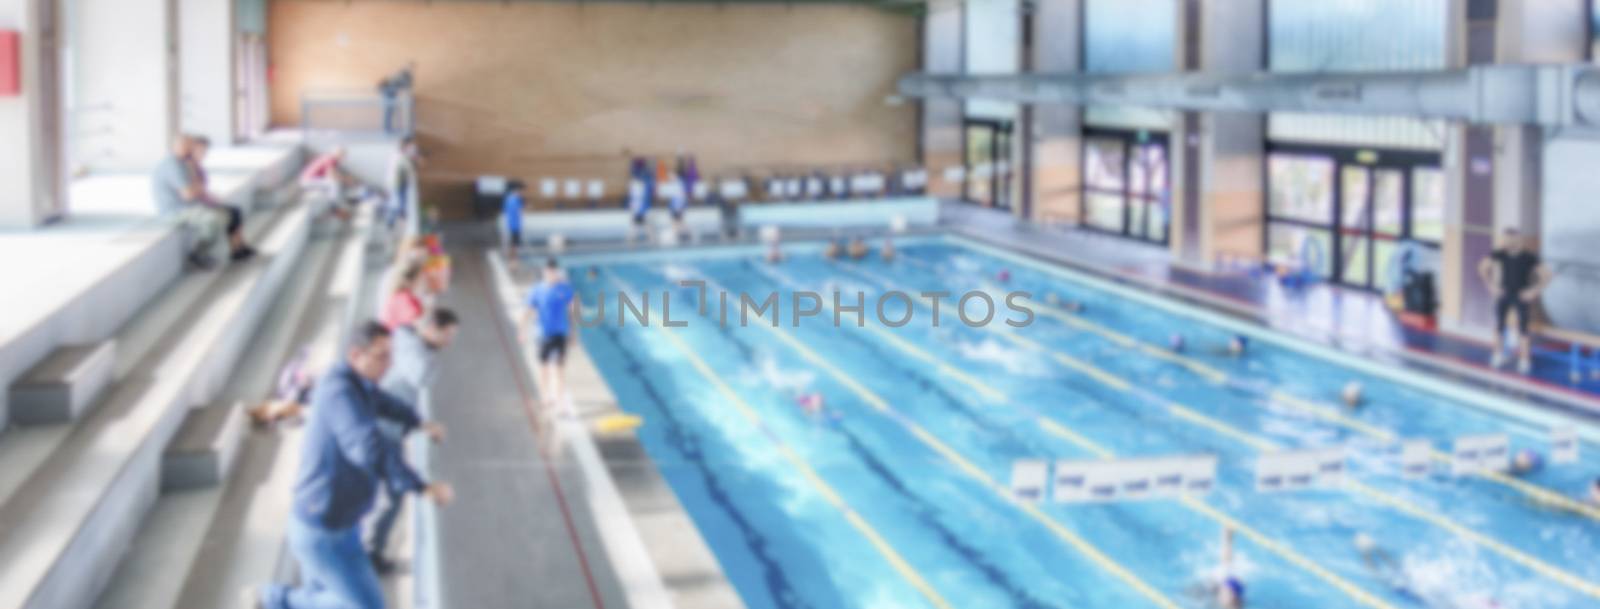 Defocused background with aerial view of a swimming pool indoor by marcorubino